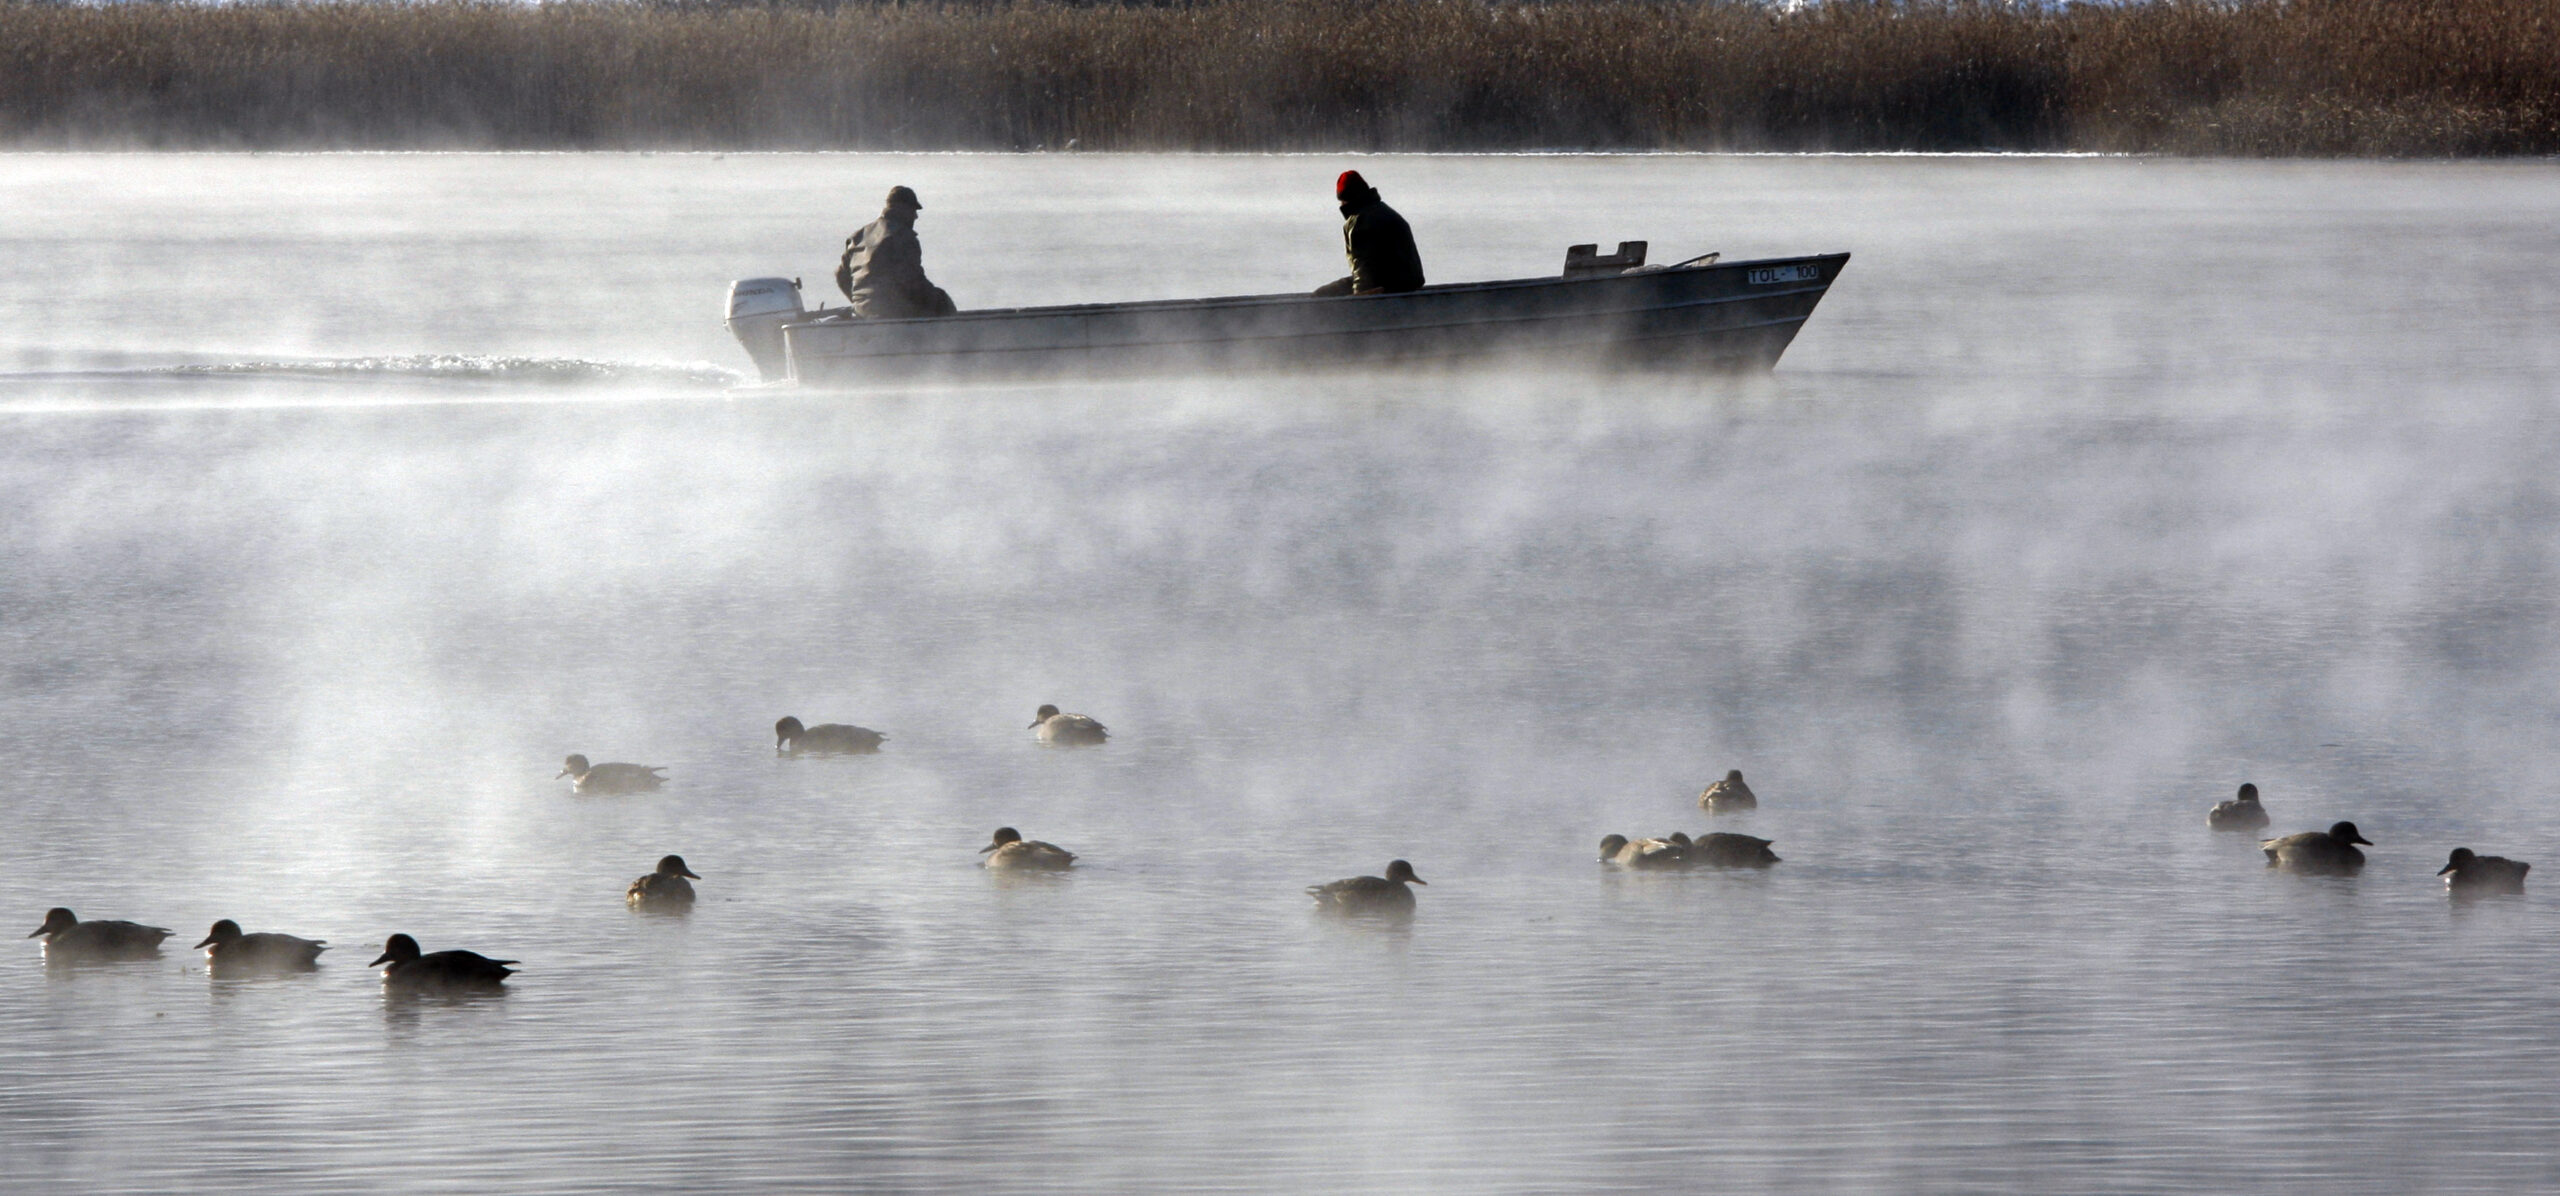 Two people sit in a john boat and pass ducks floating in the water.